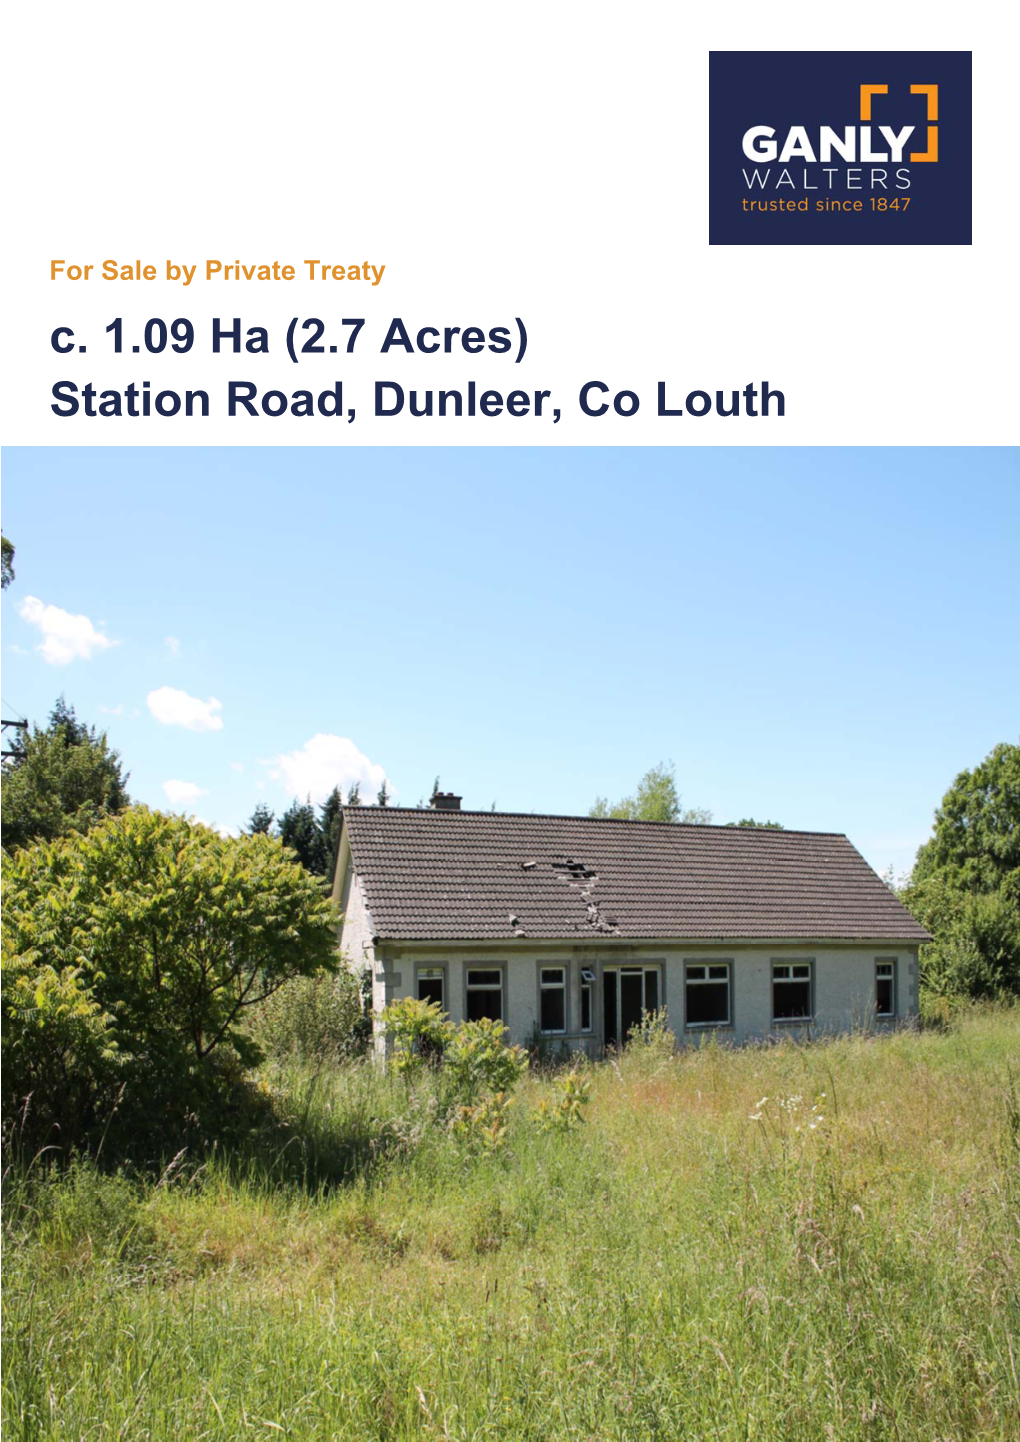 C. 1.09 Ha (2.7 Acres) Station Road, Dunleer, Co Louth